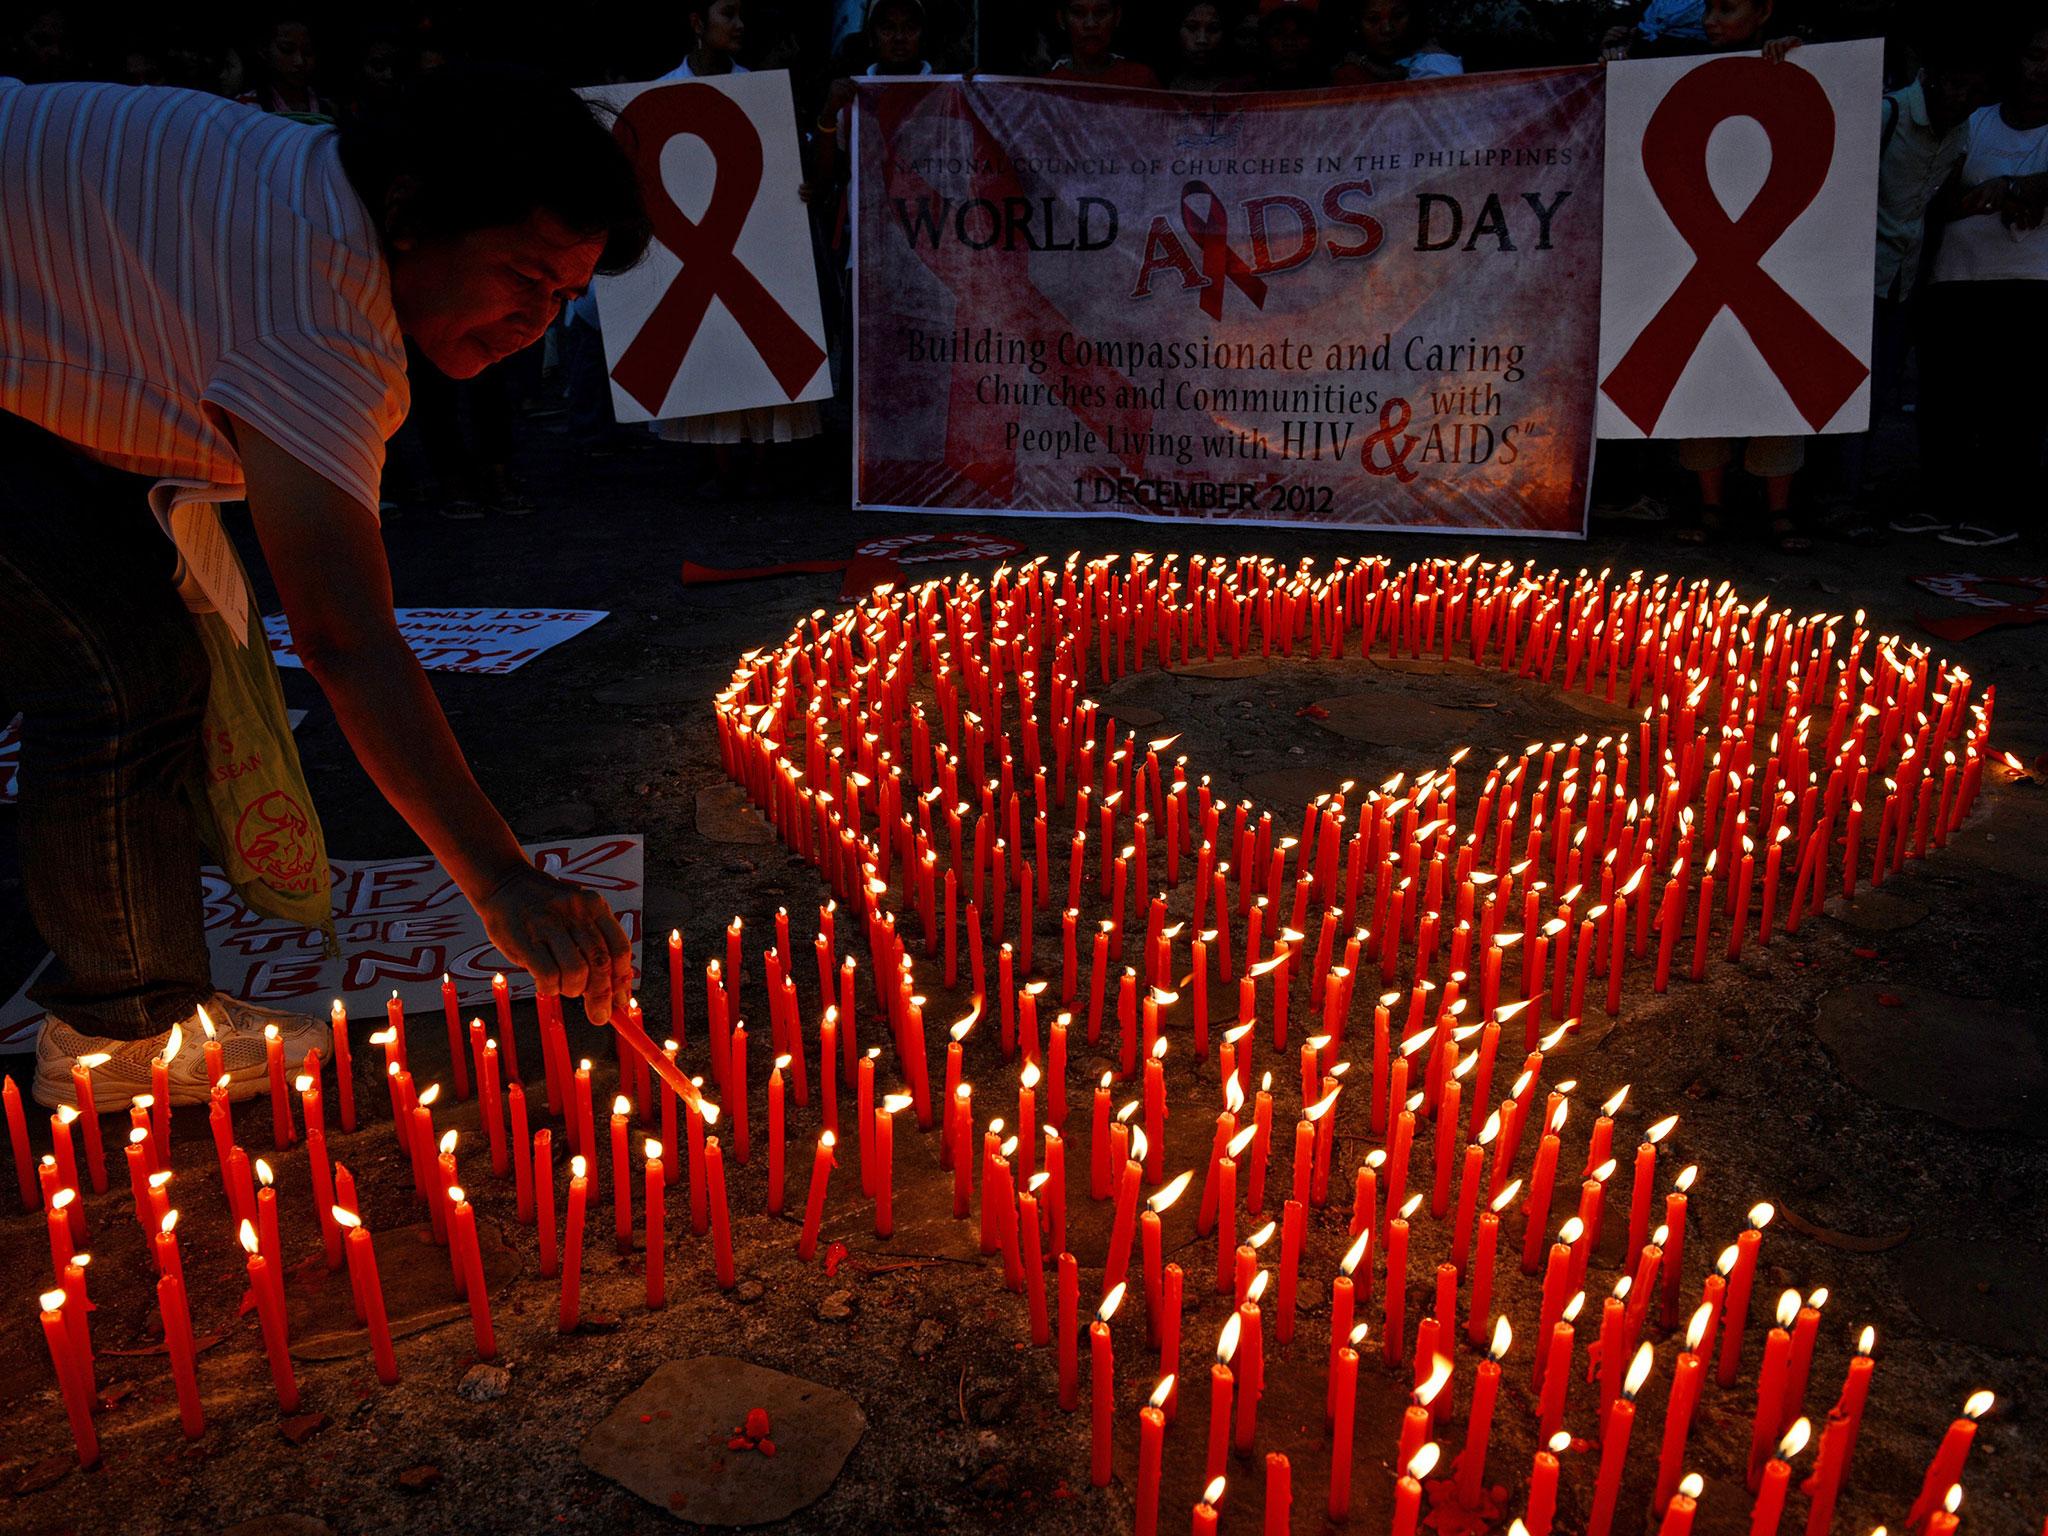 A candle display marking World Aids Day earlier this month